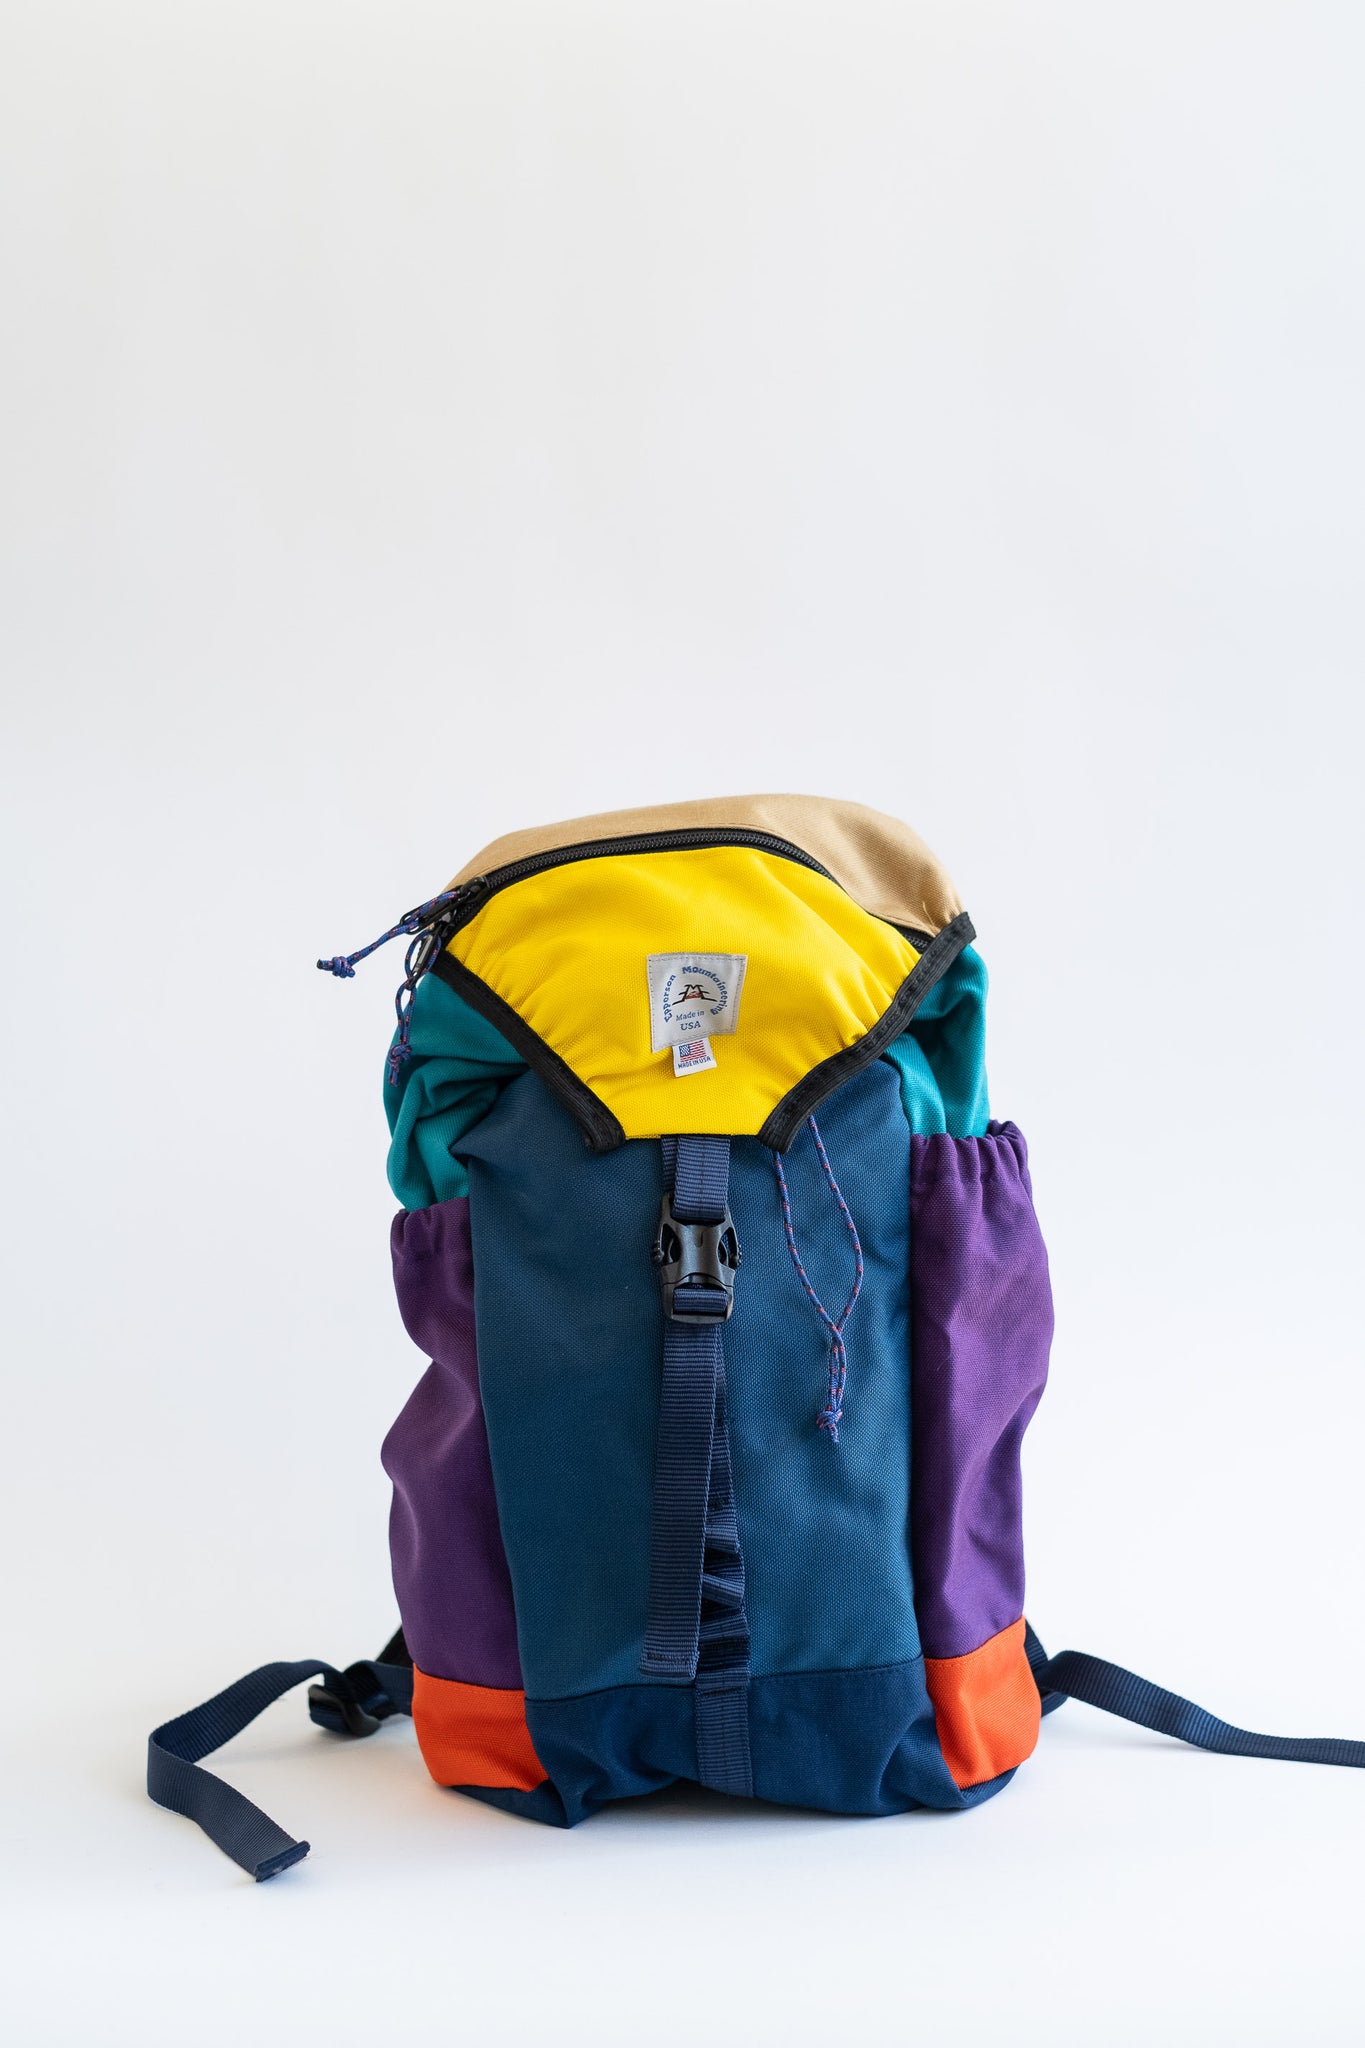 understory-shop - EPPERSON MOUNTAINEERING - SMALL CLIMB PACK